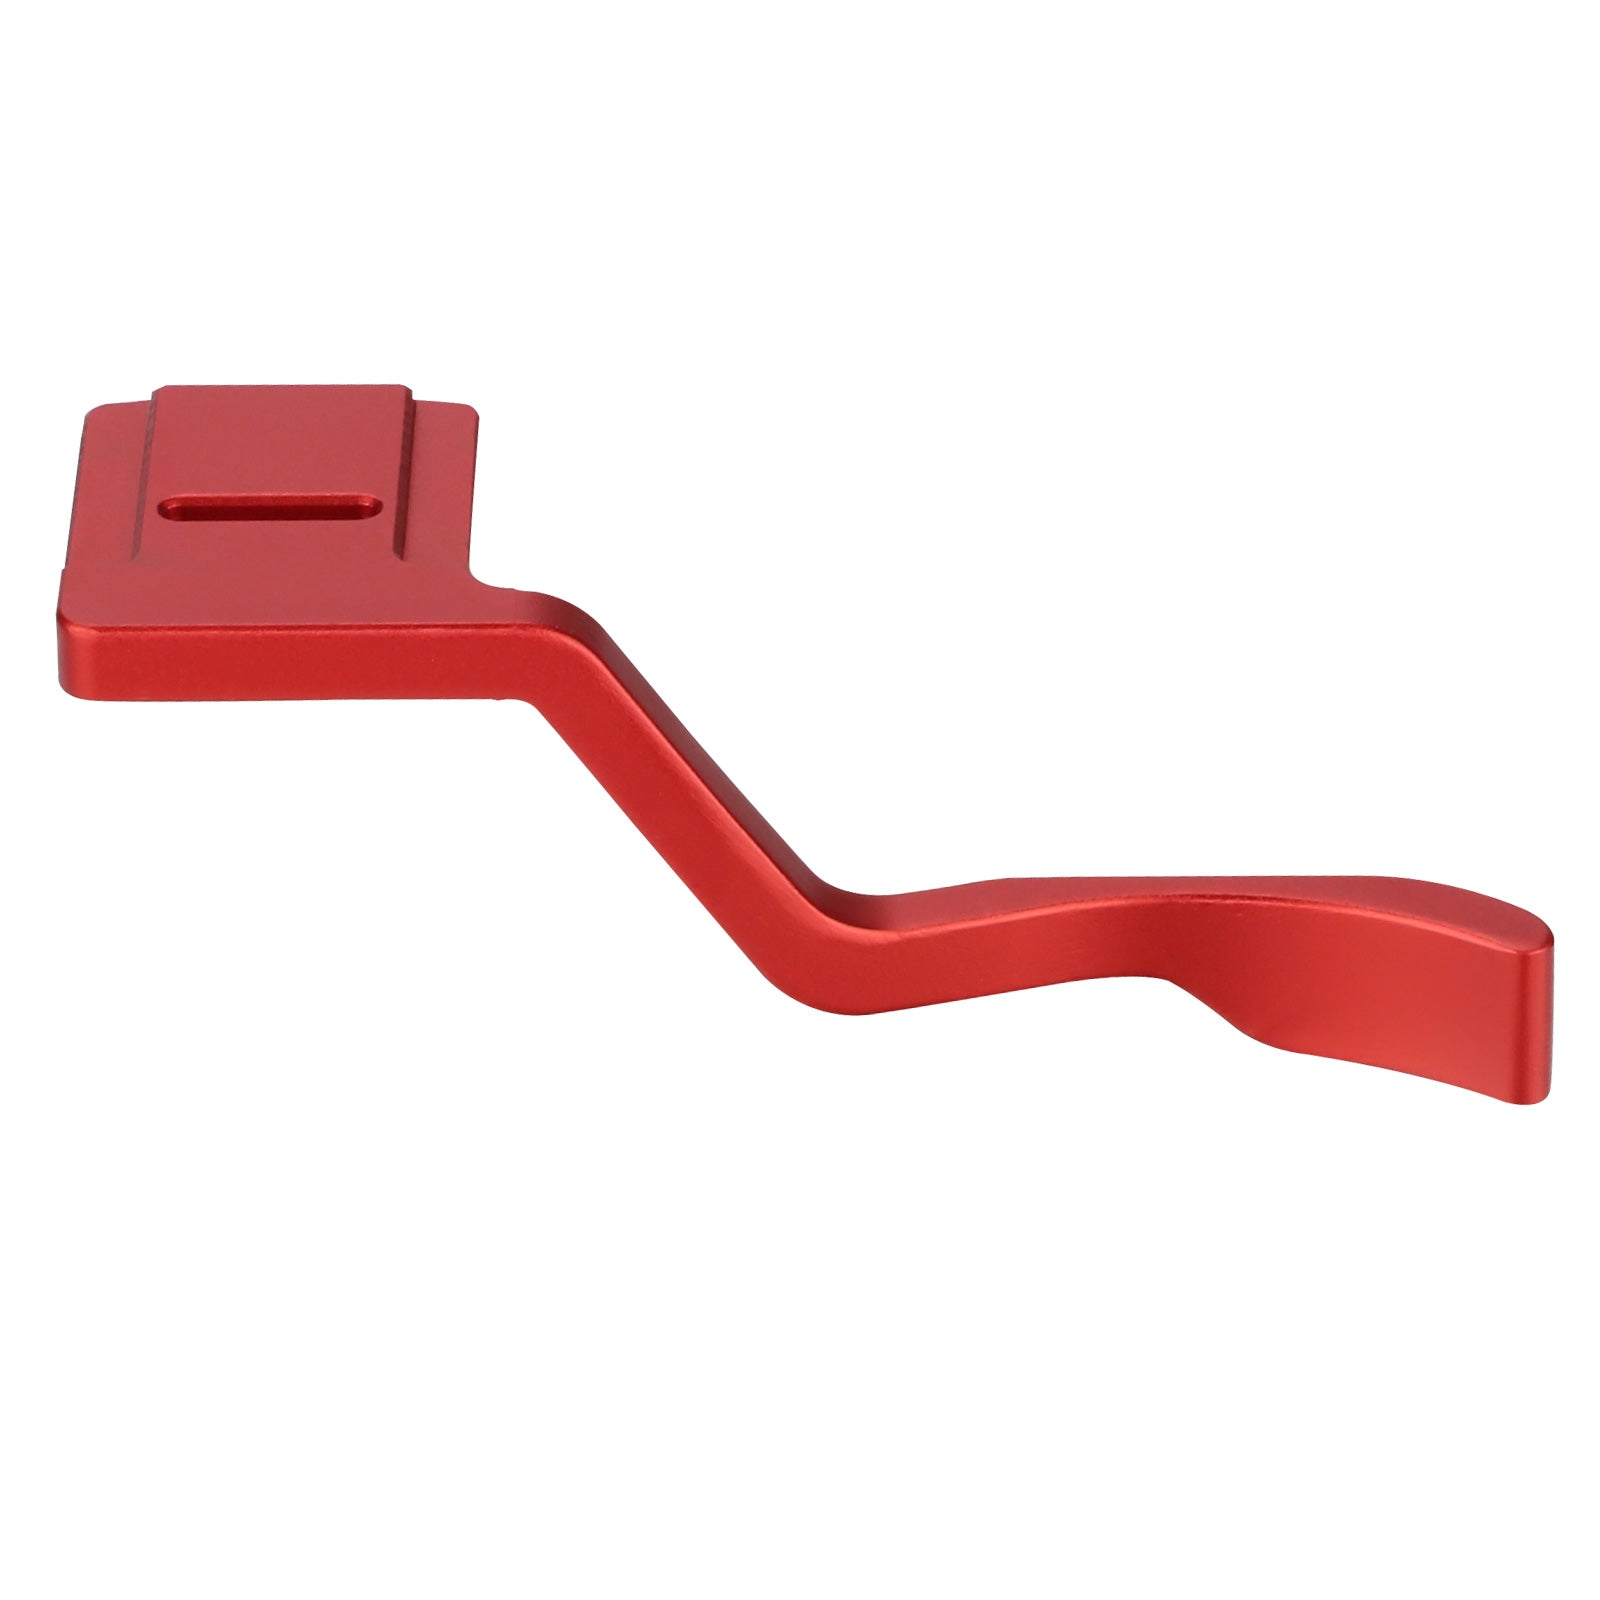 Haoge THB-ZFCR Hand Grip Metal Hot Shoe Thumb Up Rest for Nikon Z fc Camera Red